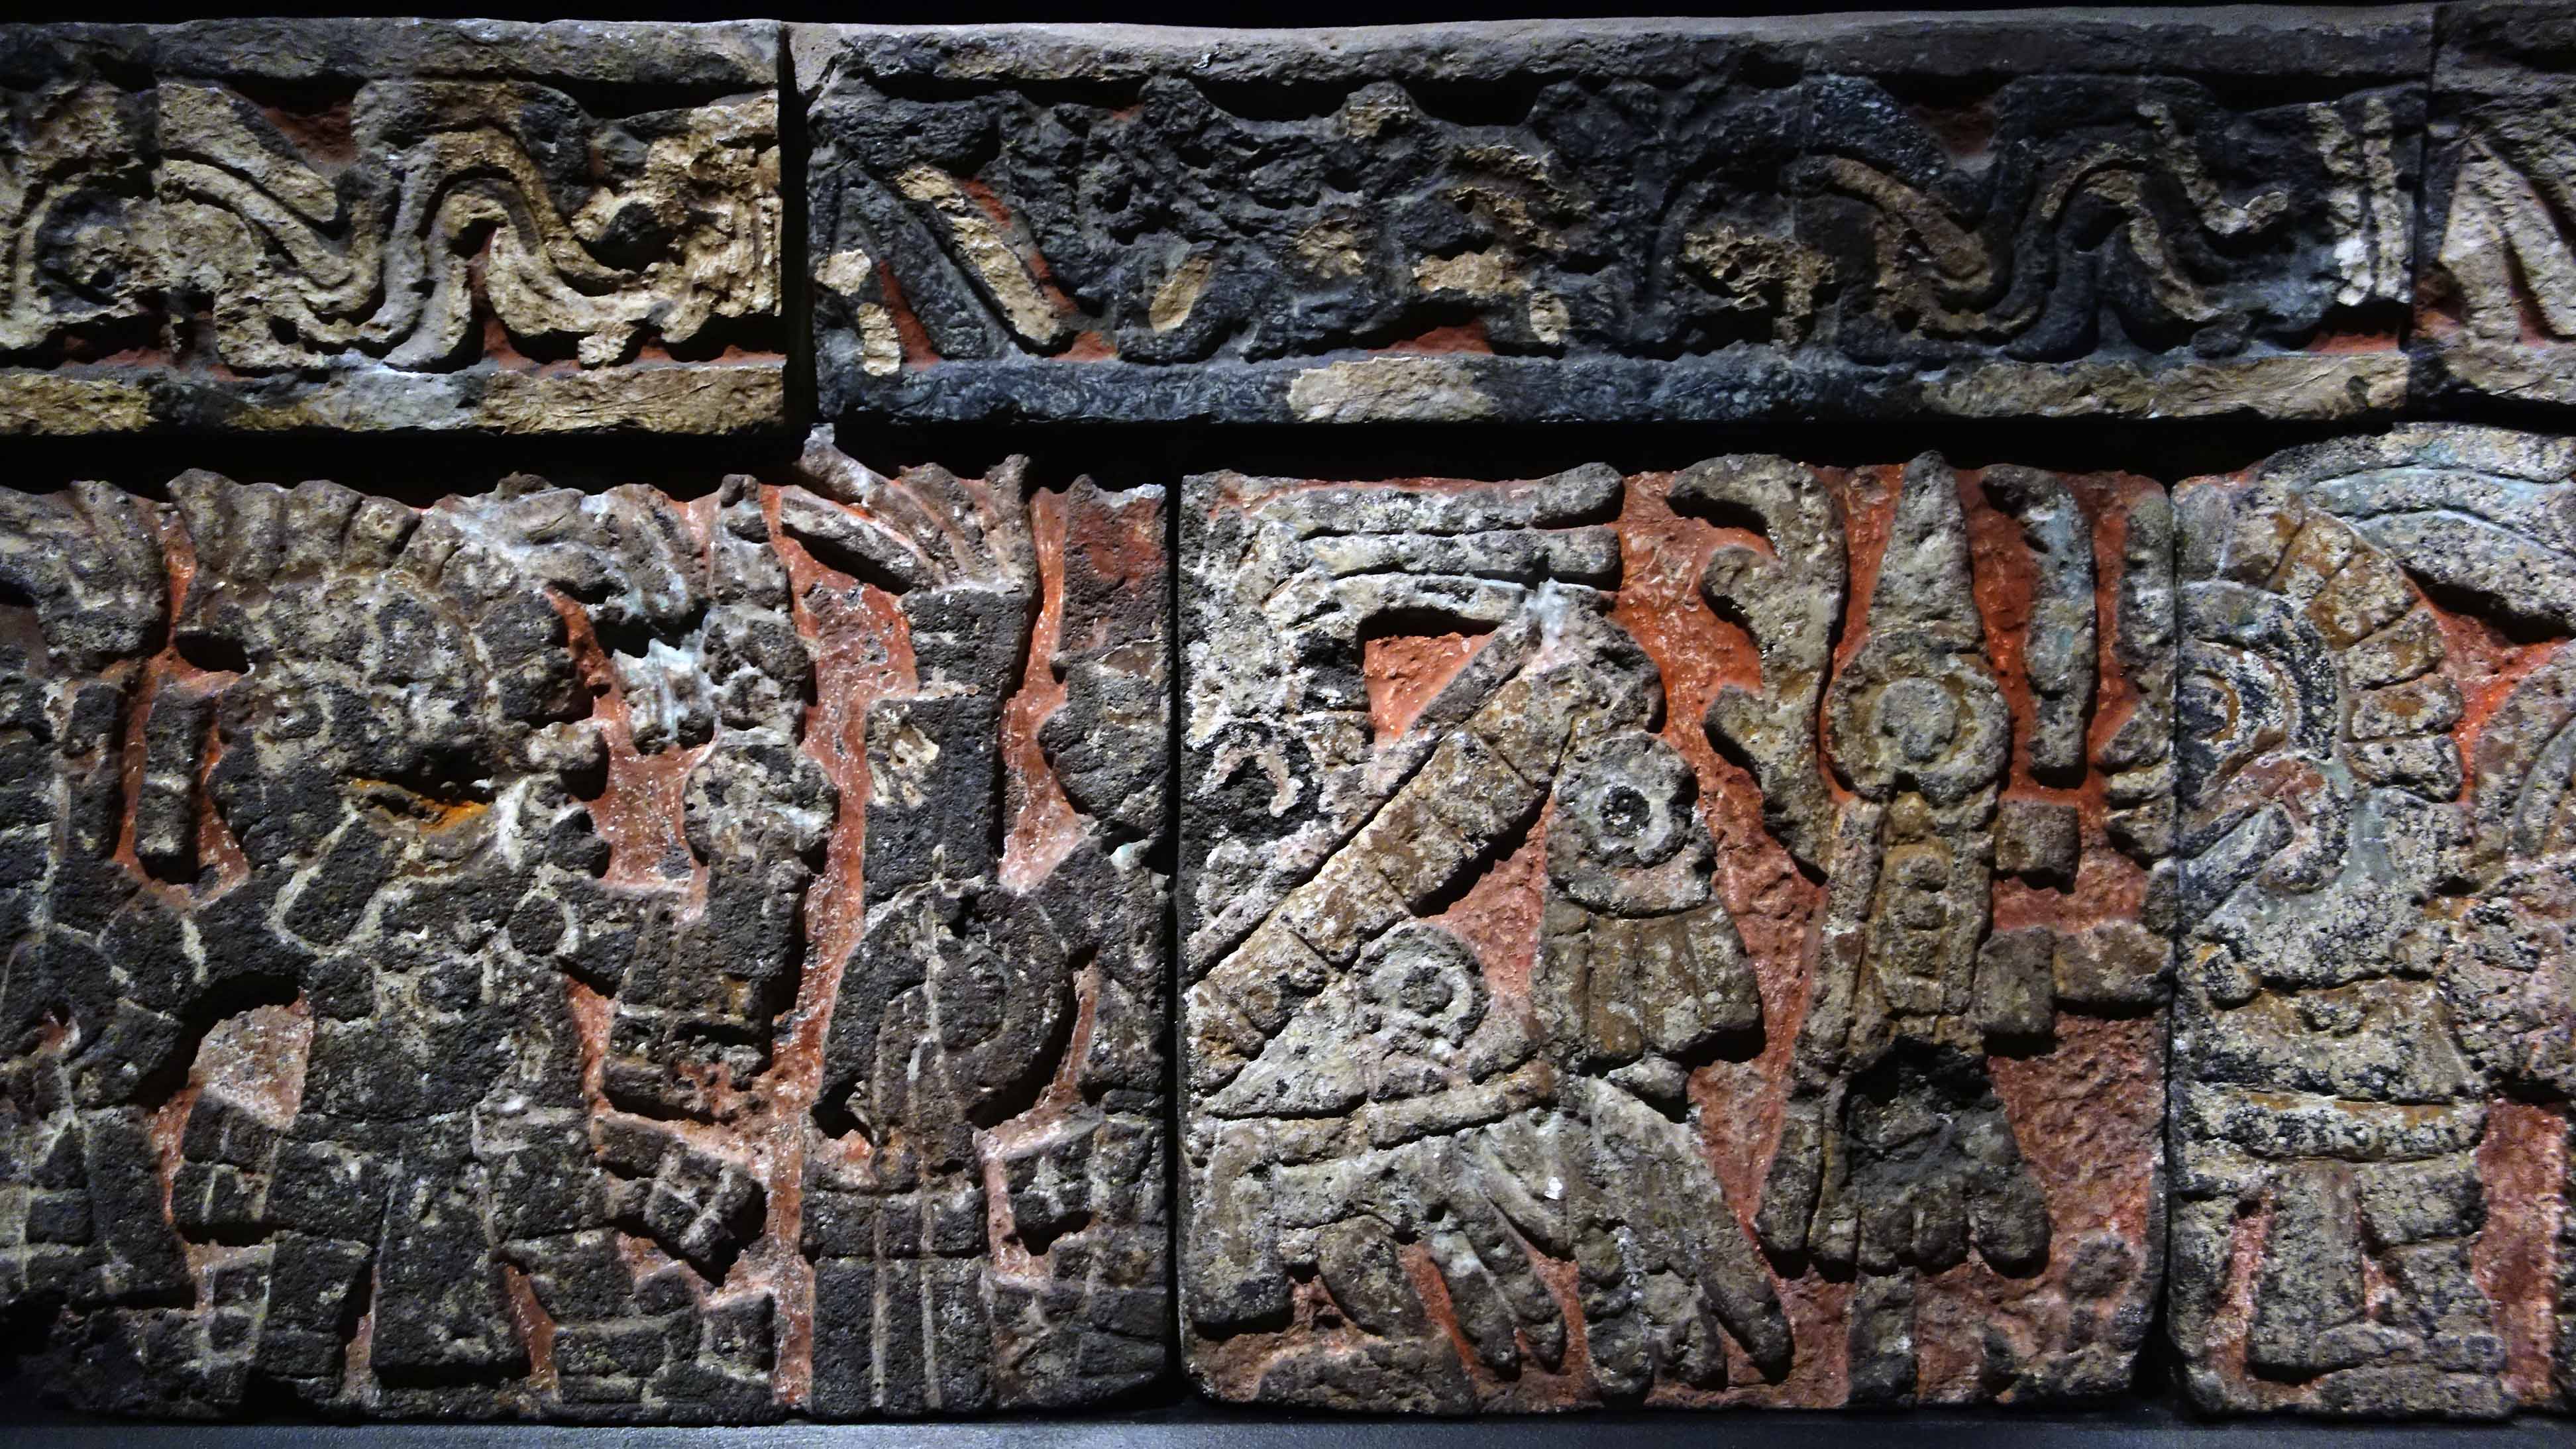 Bench in the House of the Eagles, c. 1400–1521 C.E., Tenochtitlan (today, Mexico City) (photo: Steven Zucker, CC BY-SA 4.0)